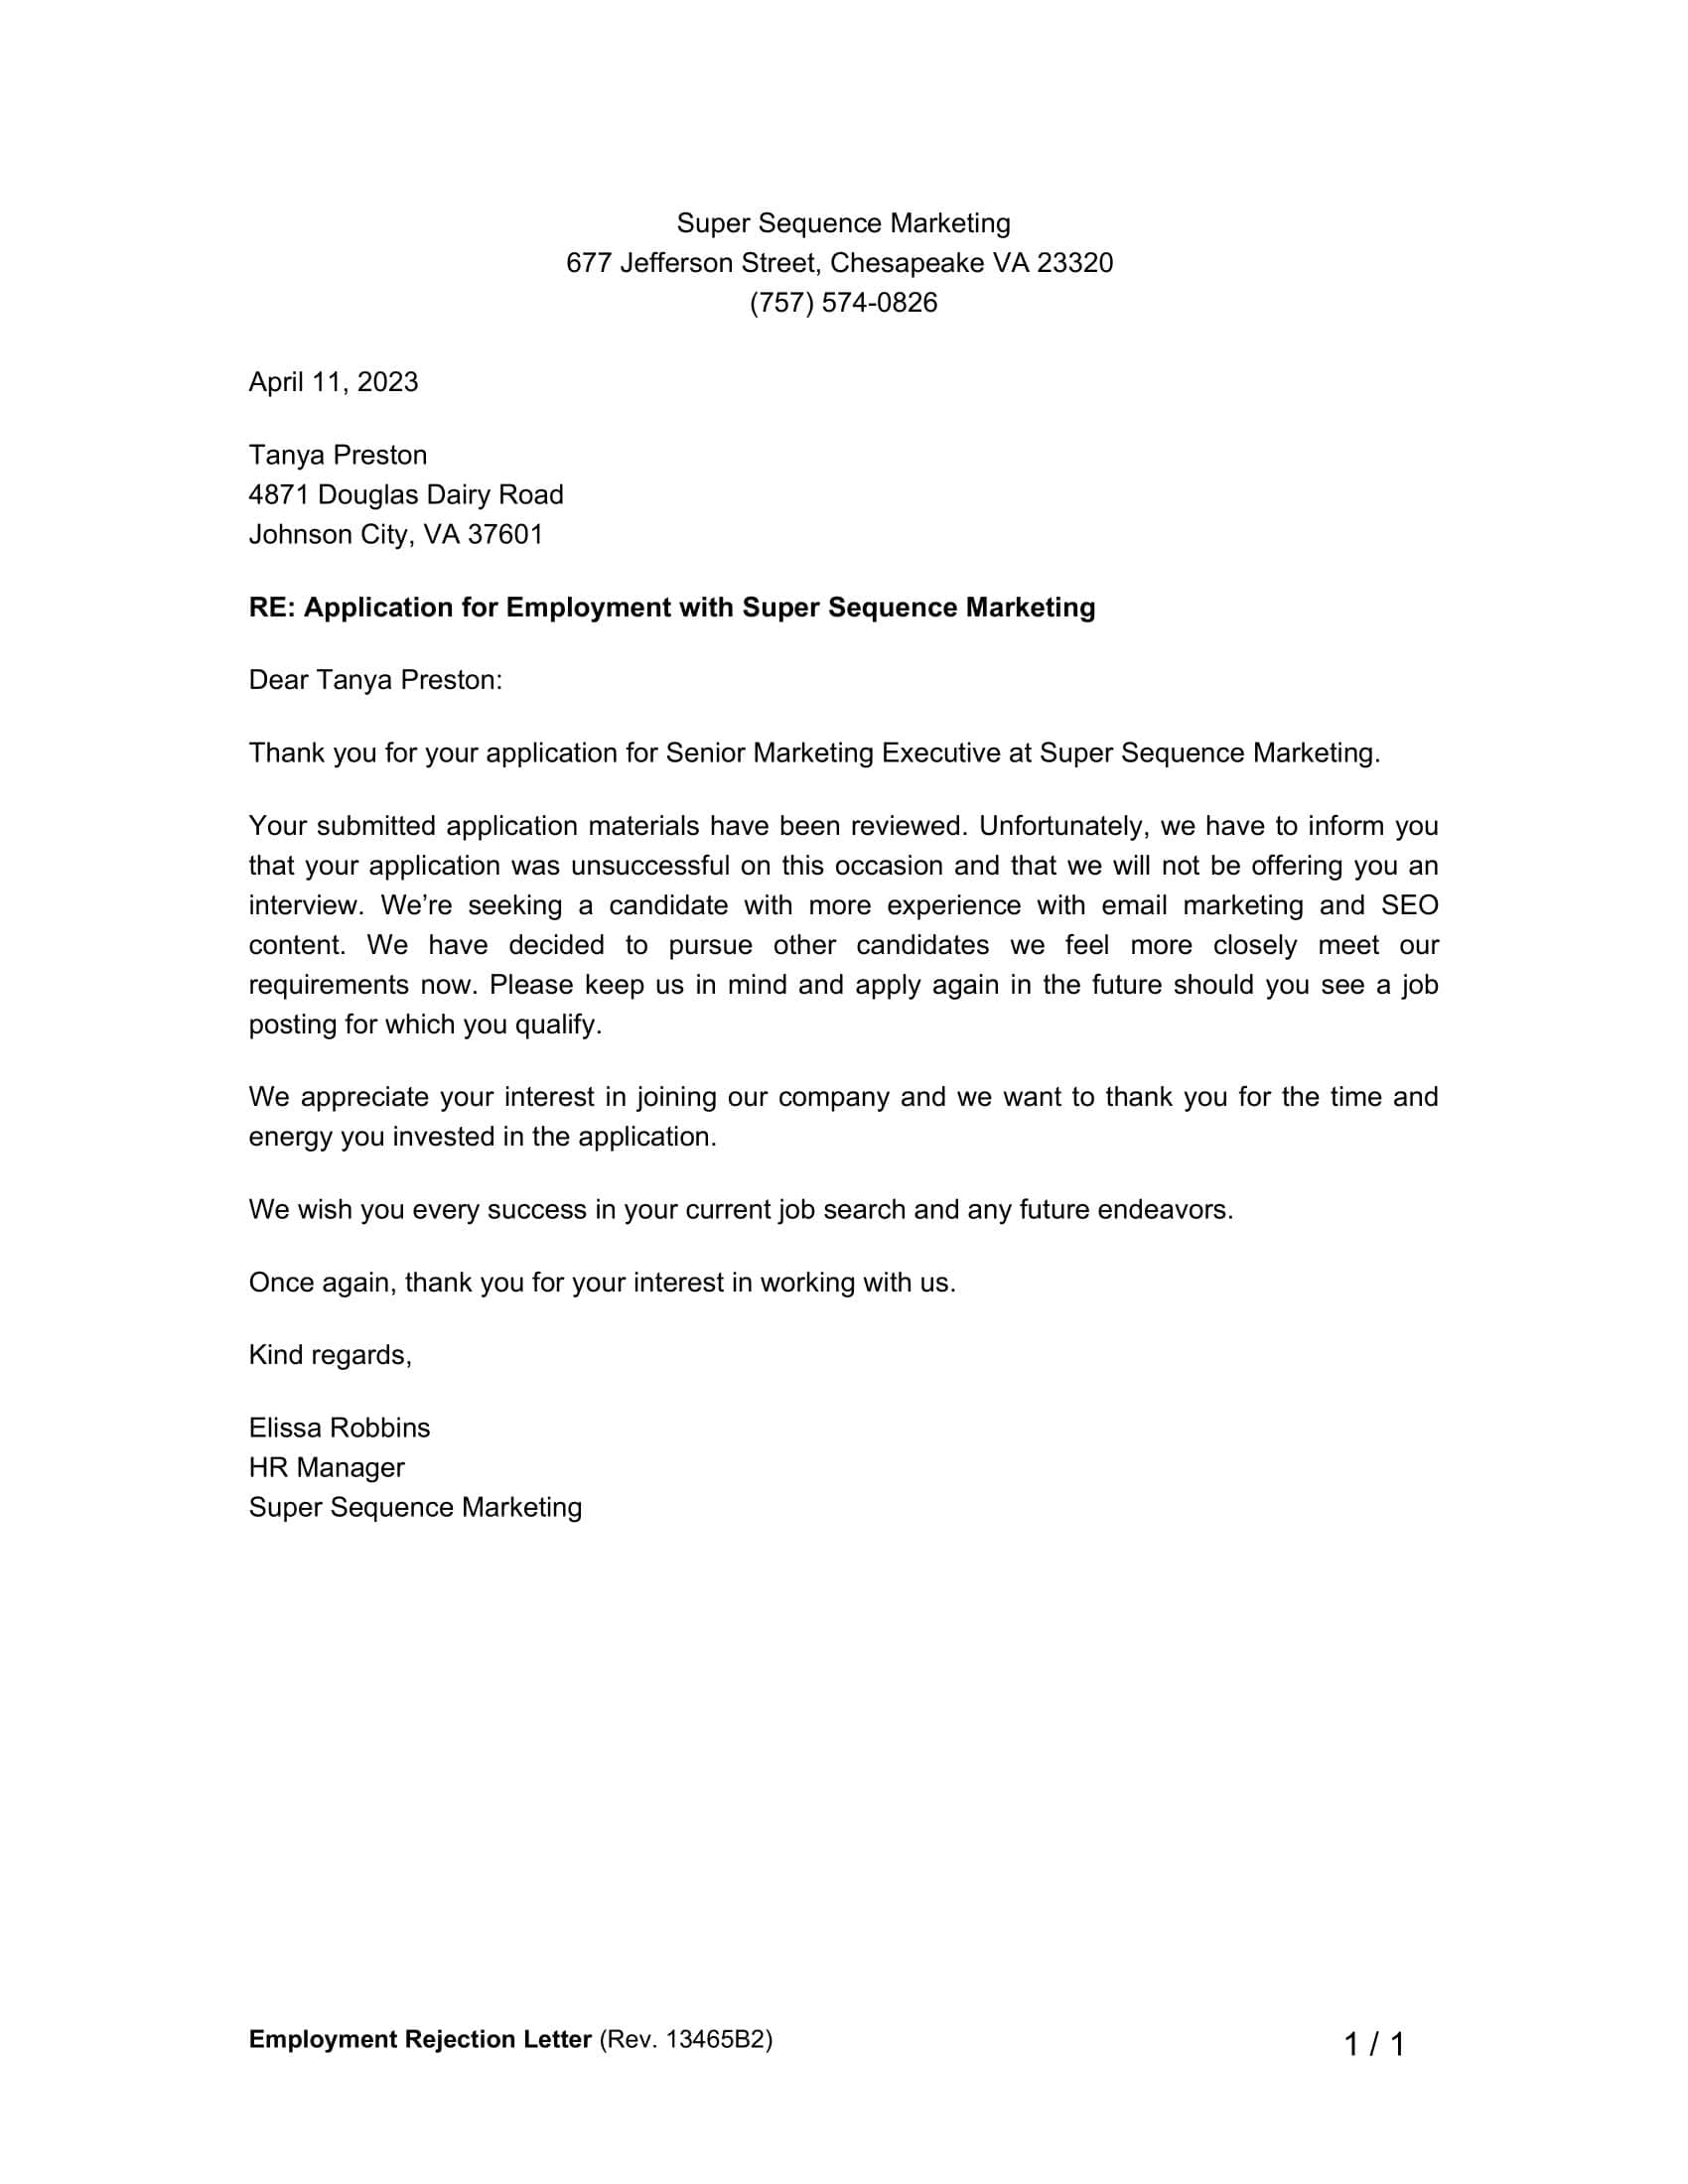 employment rejection letter example